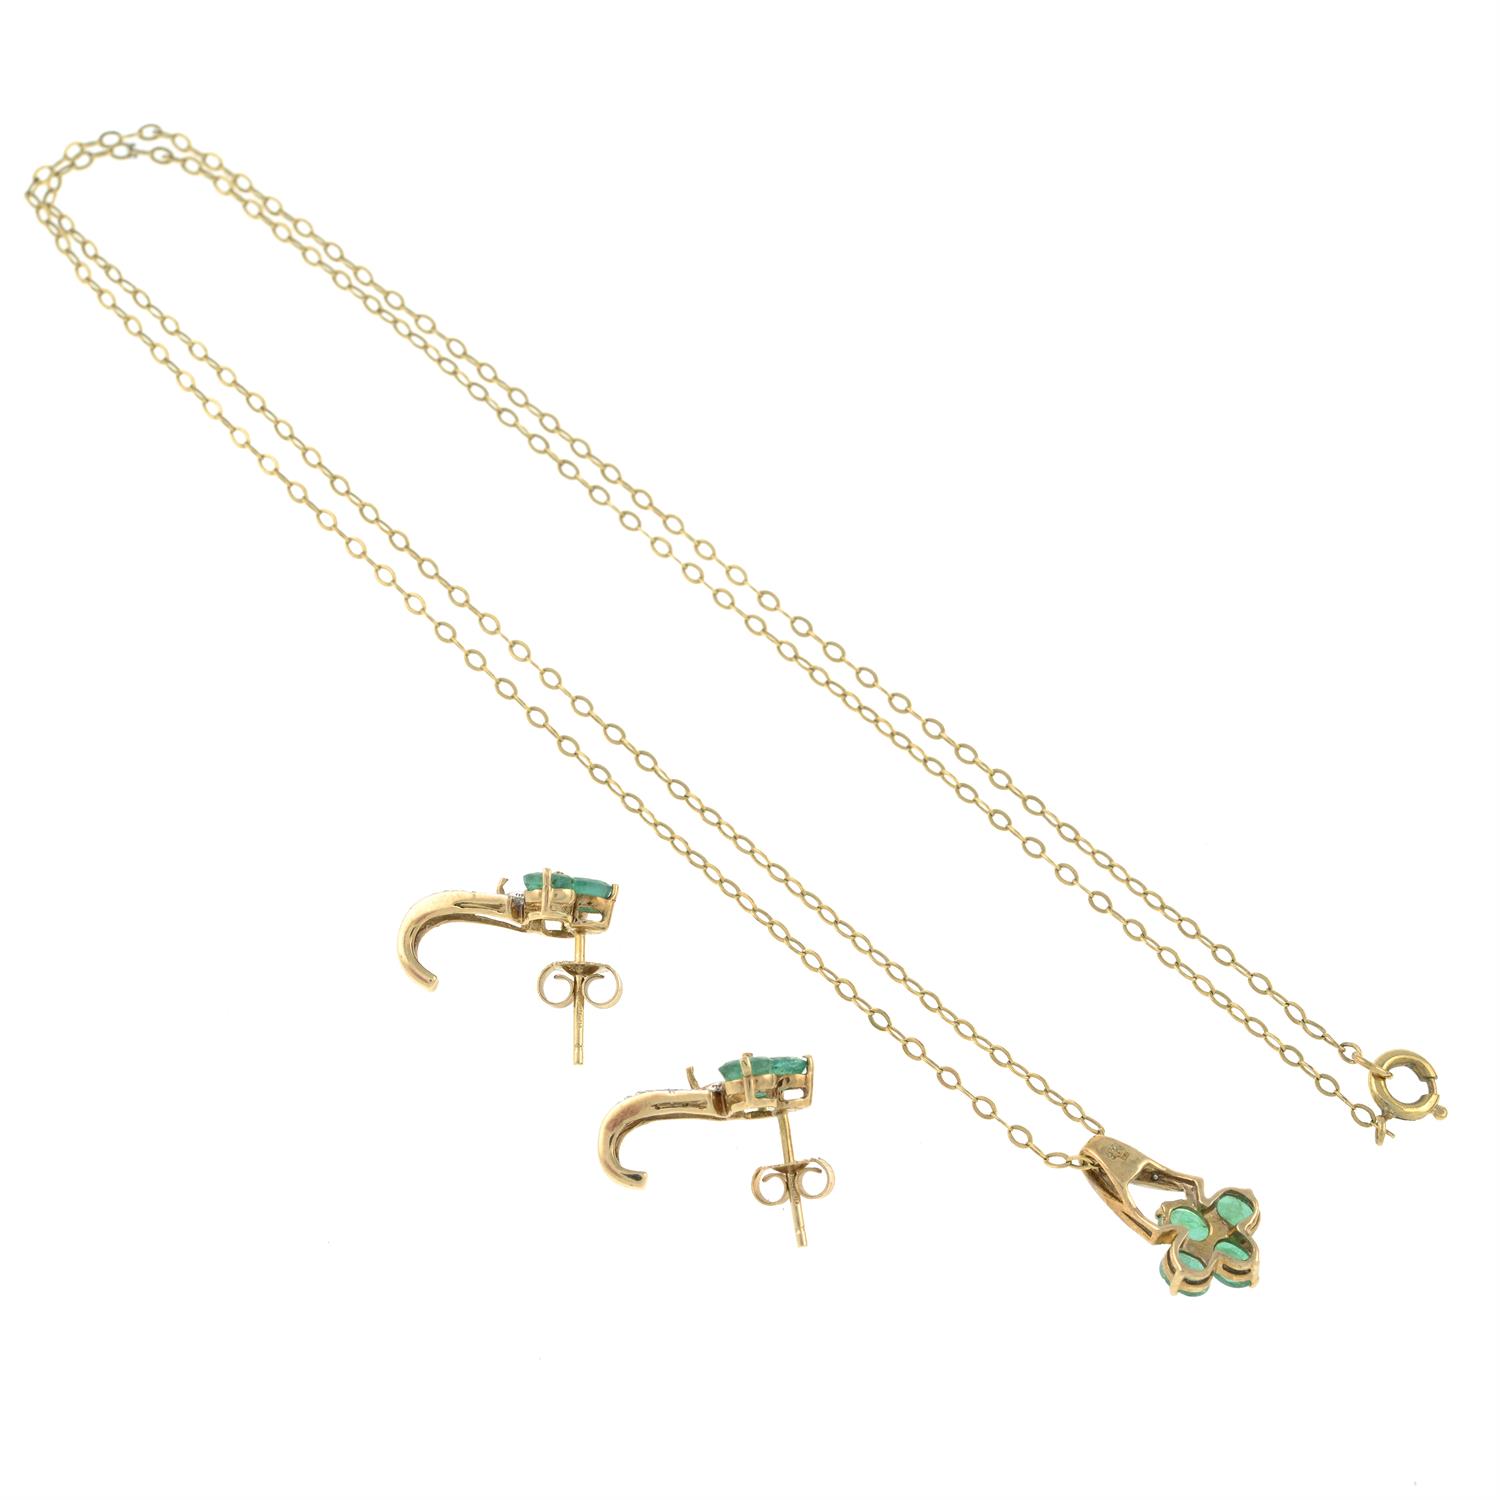 Set of 9ct gold emerald and diamond jewellery - Image 2 of 2